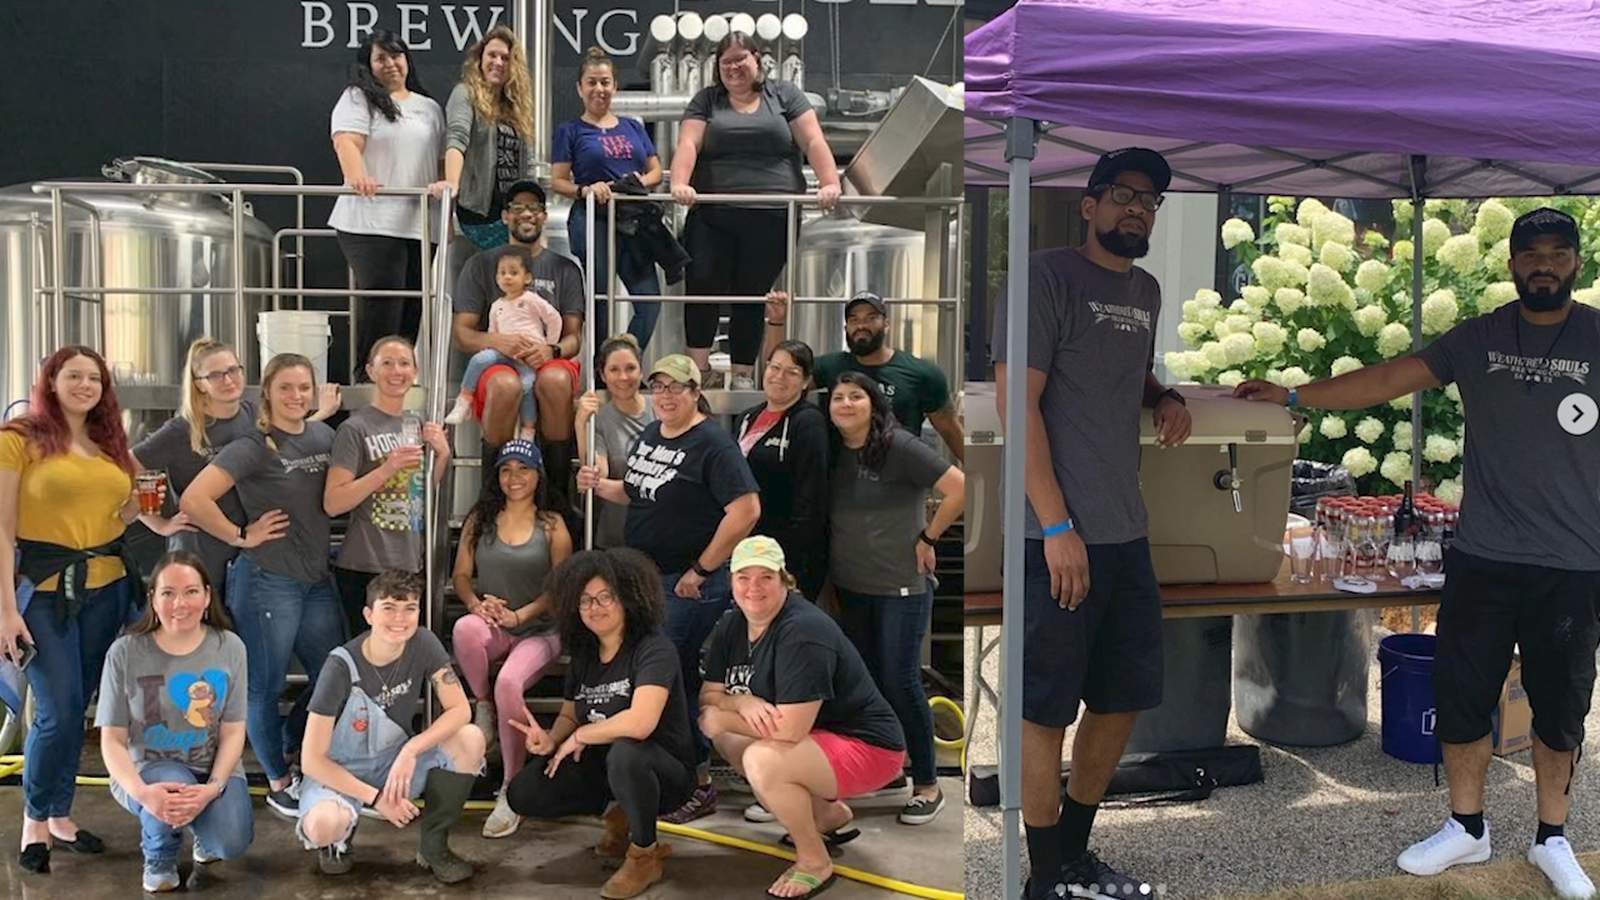 Black is Beautiful craft beer campaign nets $20K donation to San Antonio nonprofit